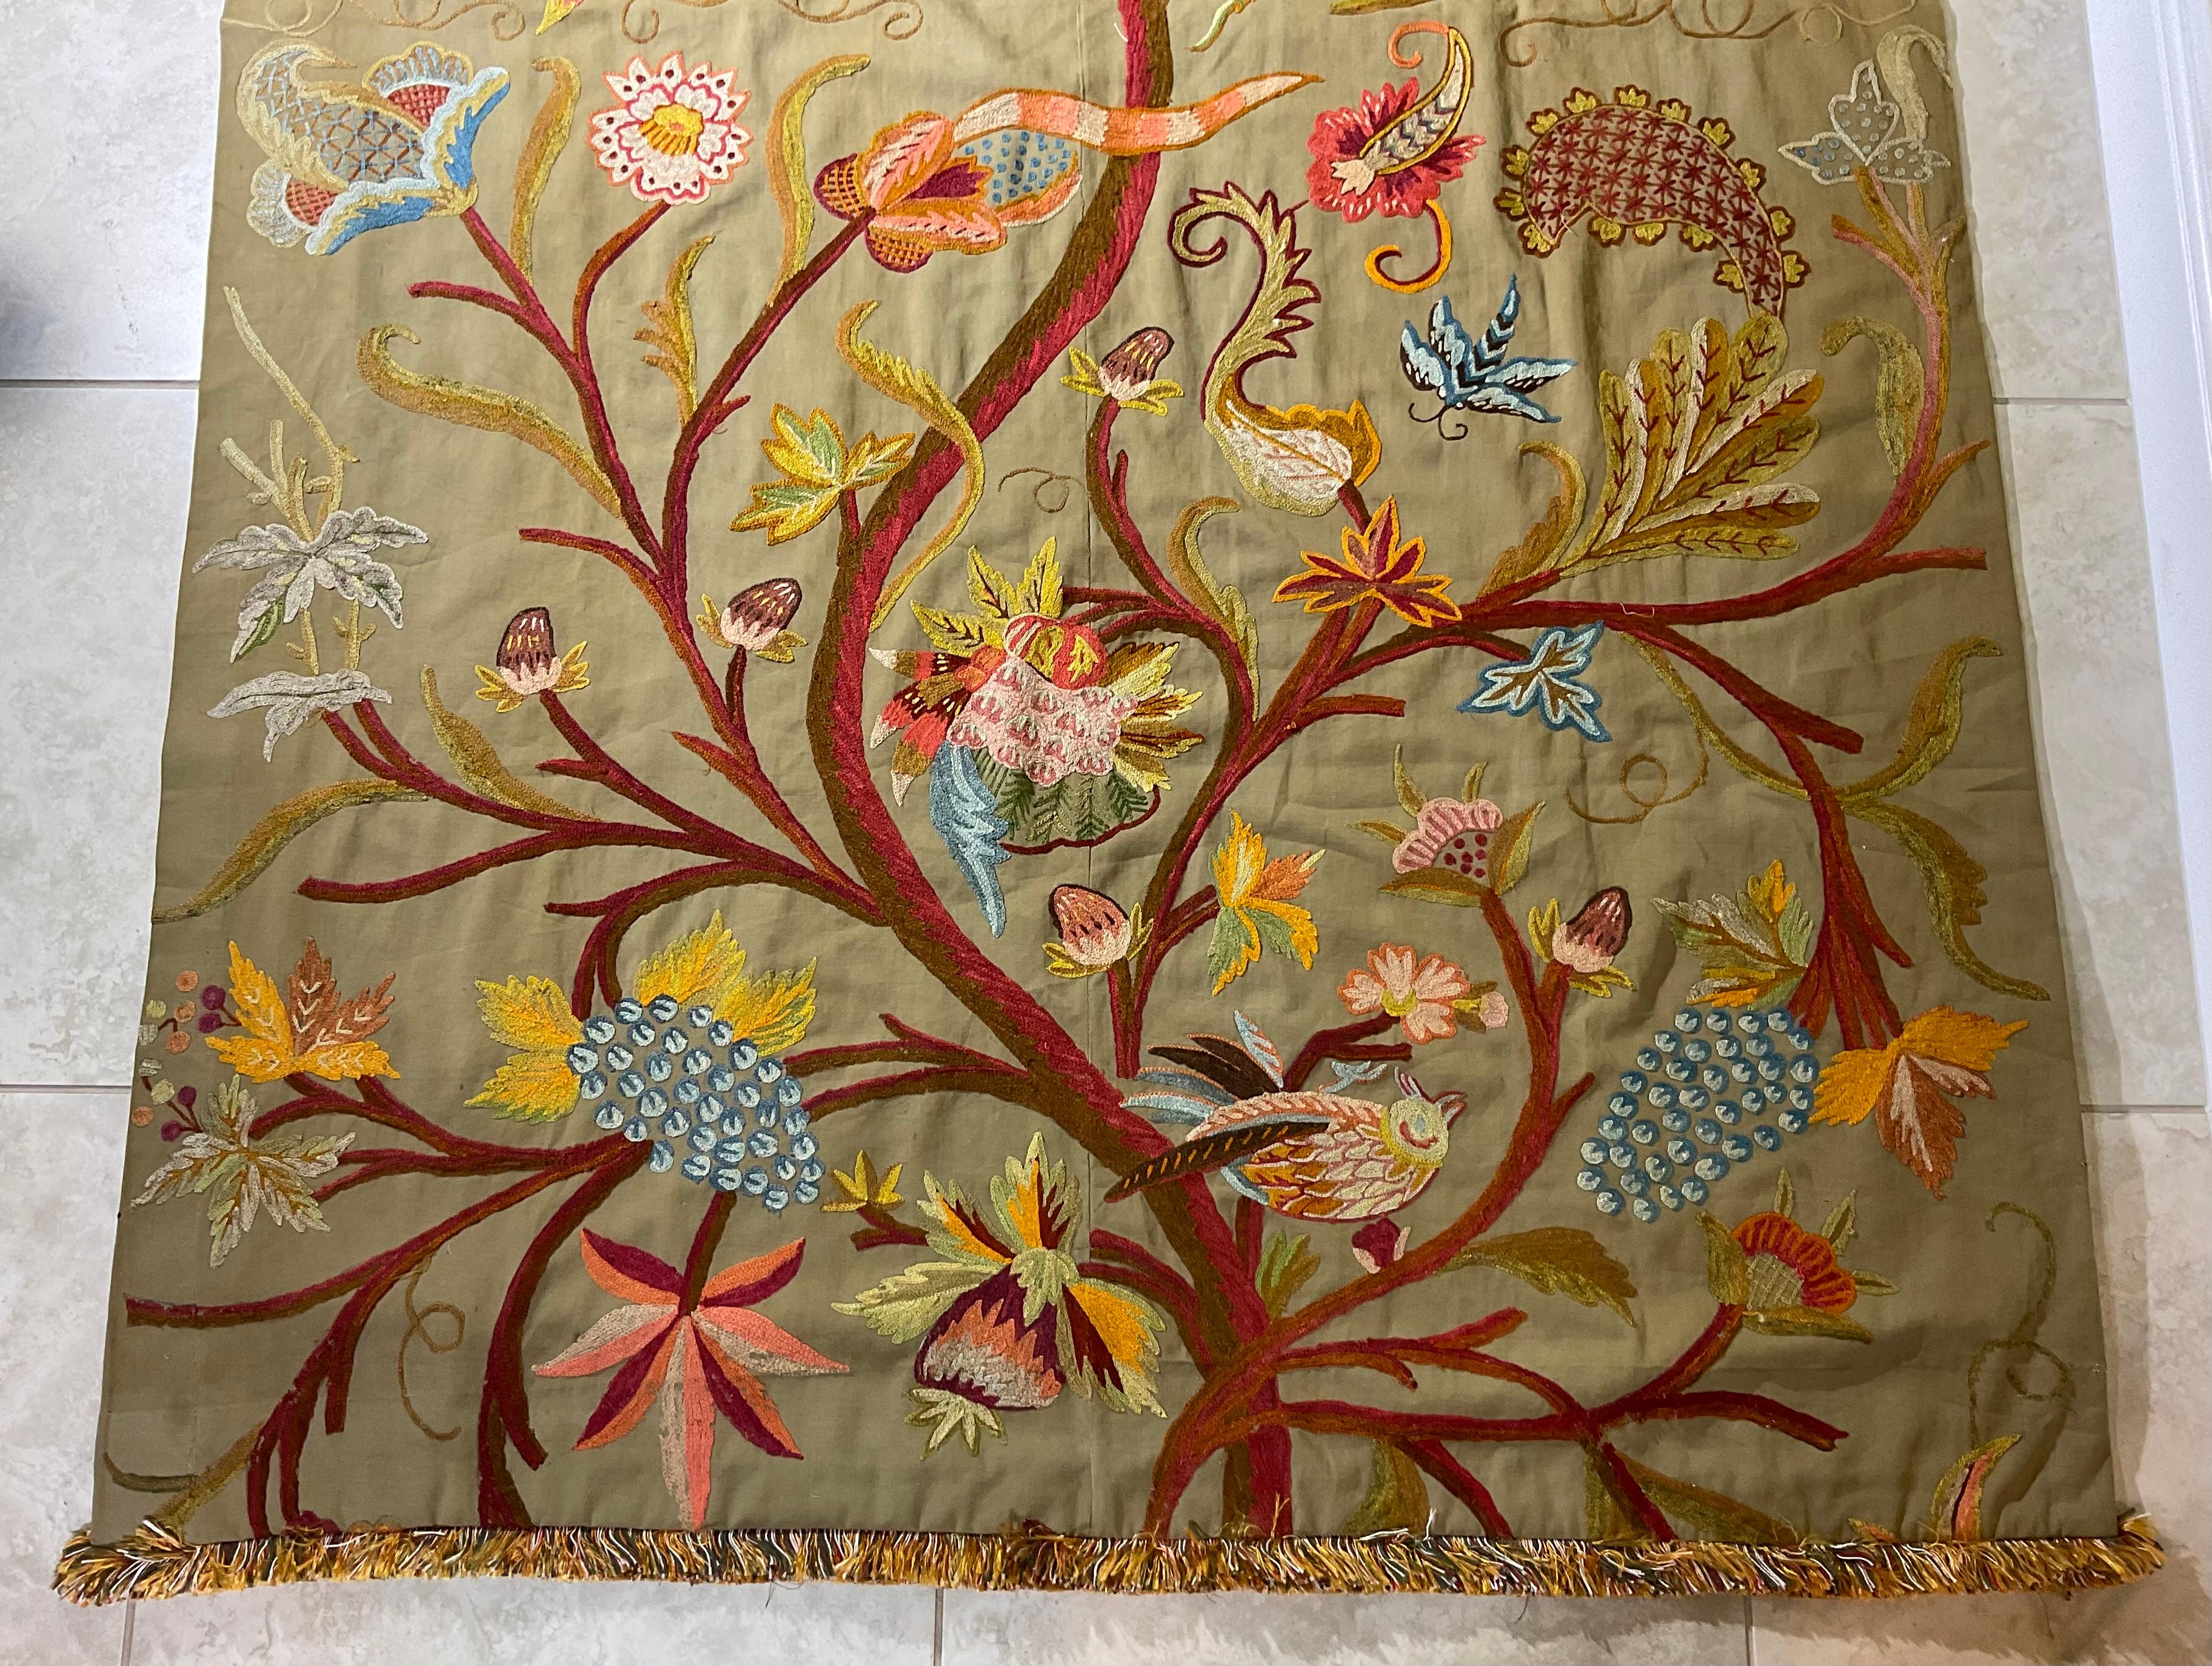 Exceptional needlepoint Hand stitched wall hanging beautiful colourful tree of life with birds bees ,butterflies, flowers and vines , All on a camel color background motifs.
Originally was used as curtain or valance ,then restored to use as wall